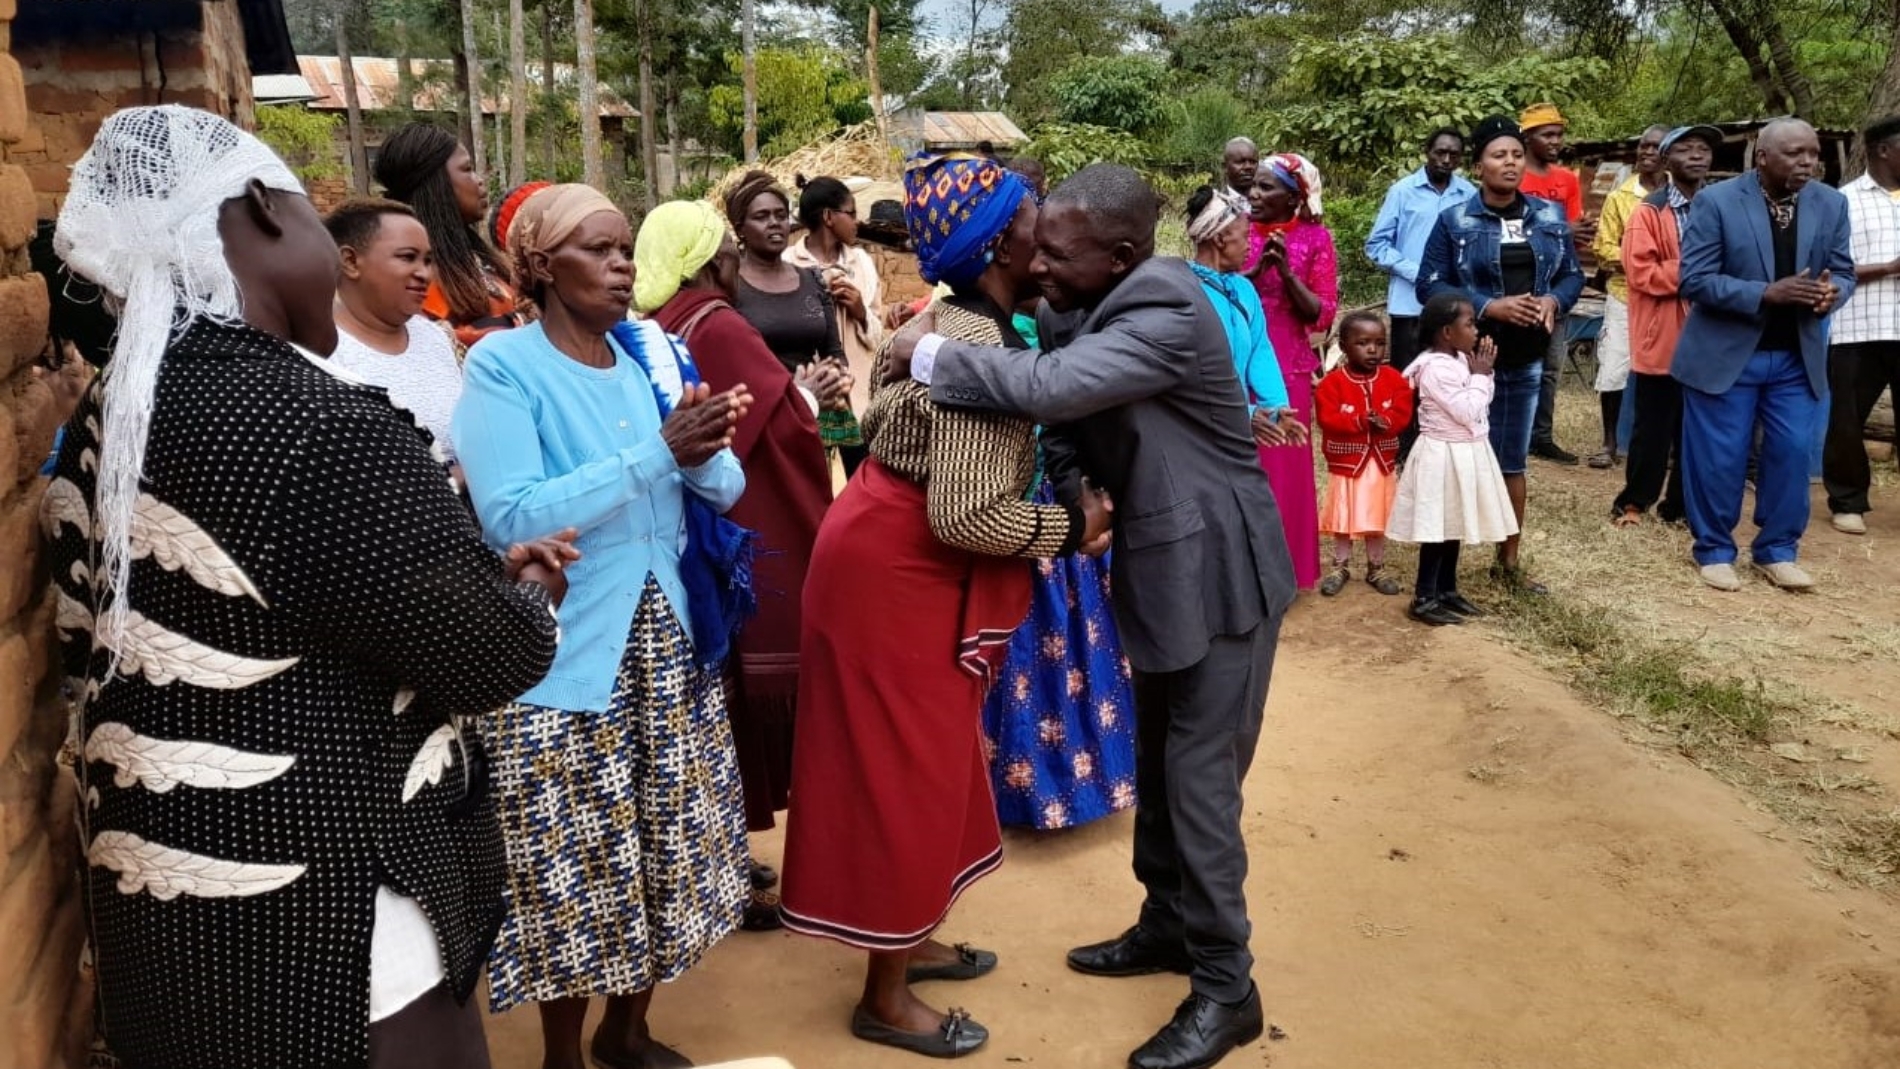 Mutunga is welcomed by family members after his arrival at home